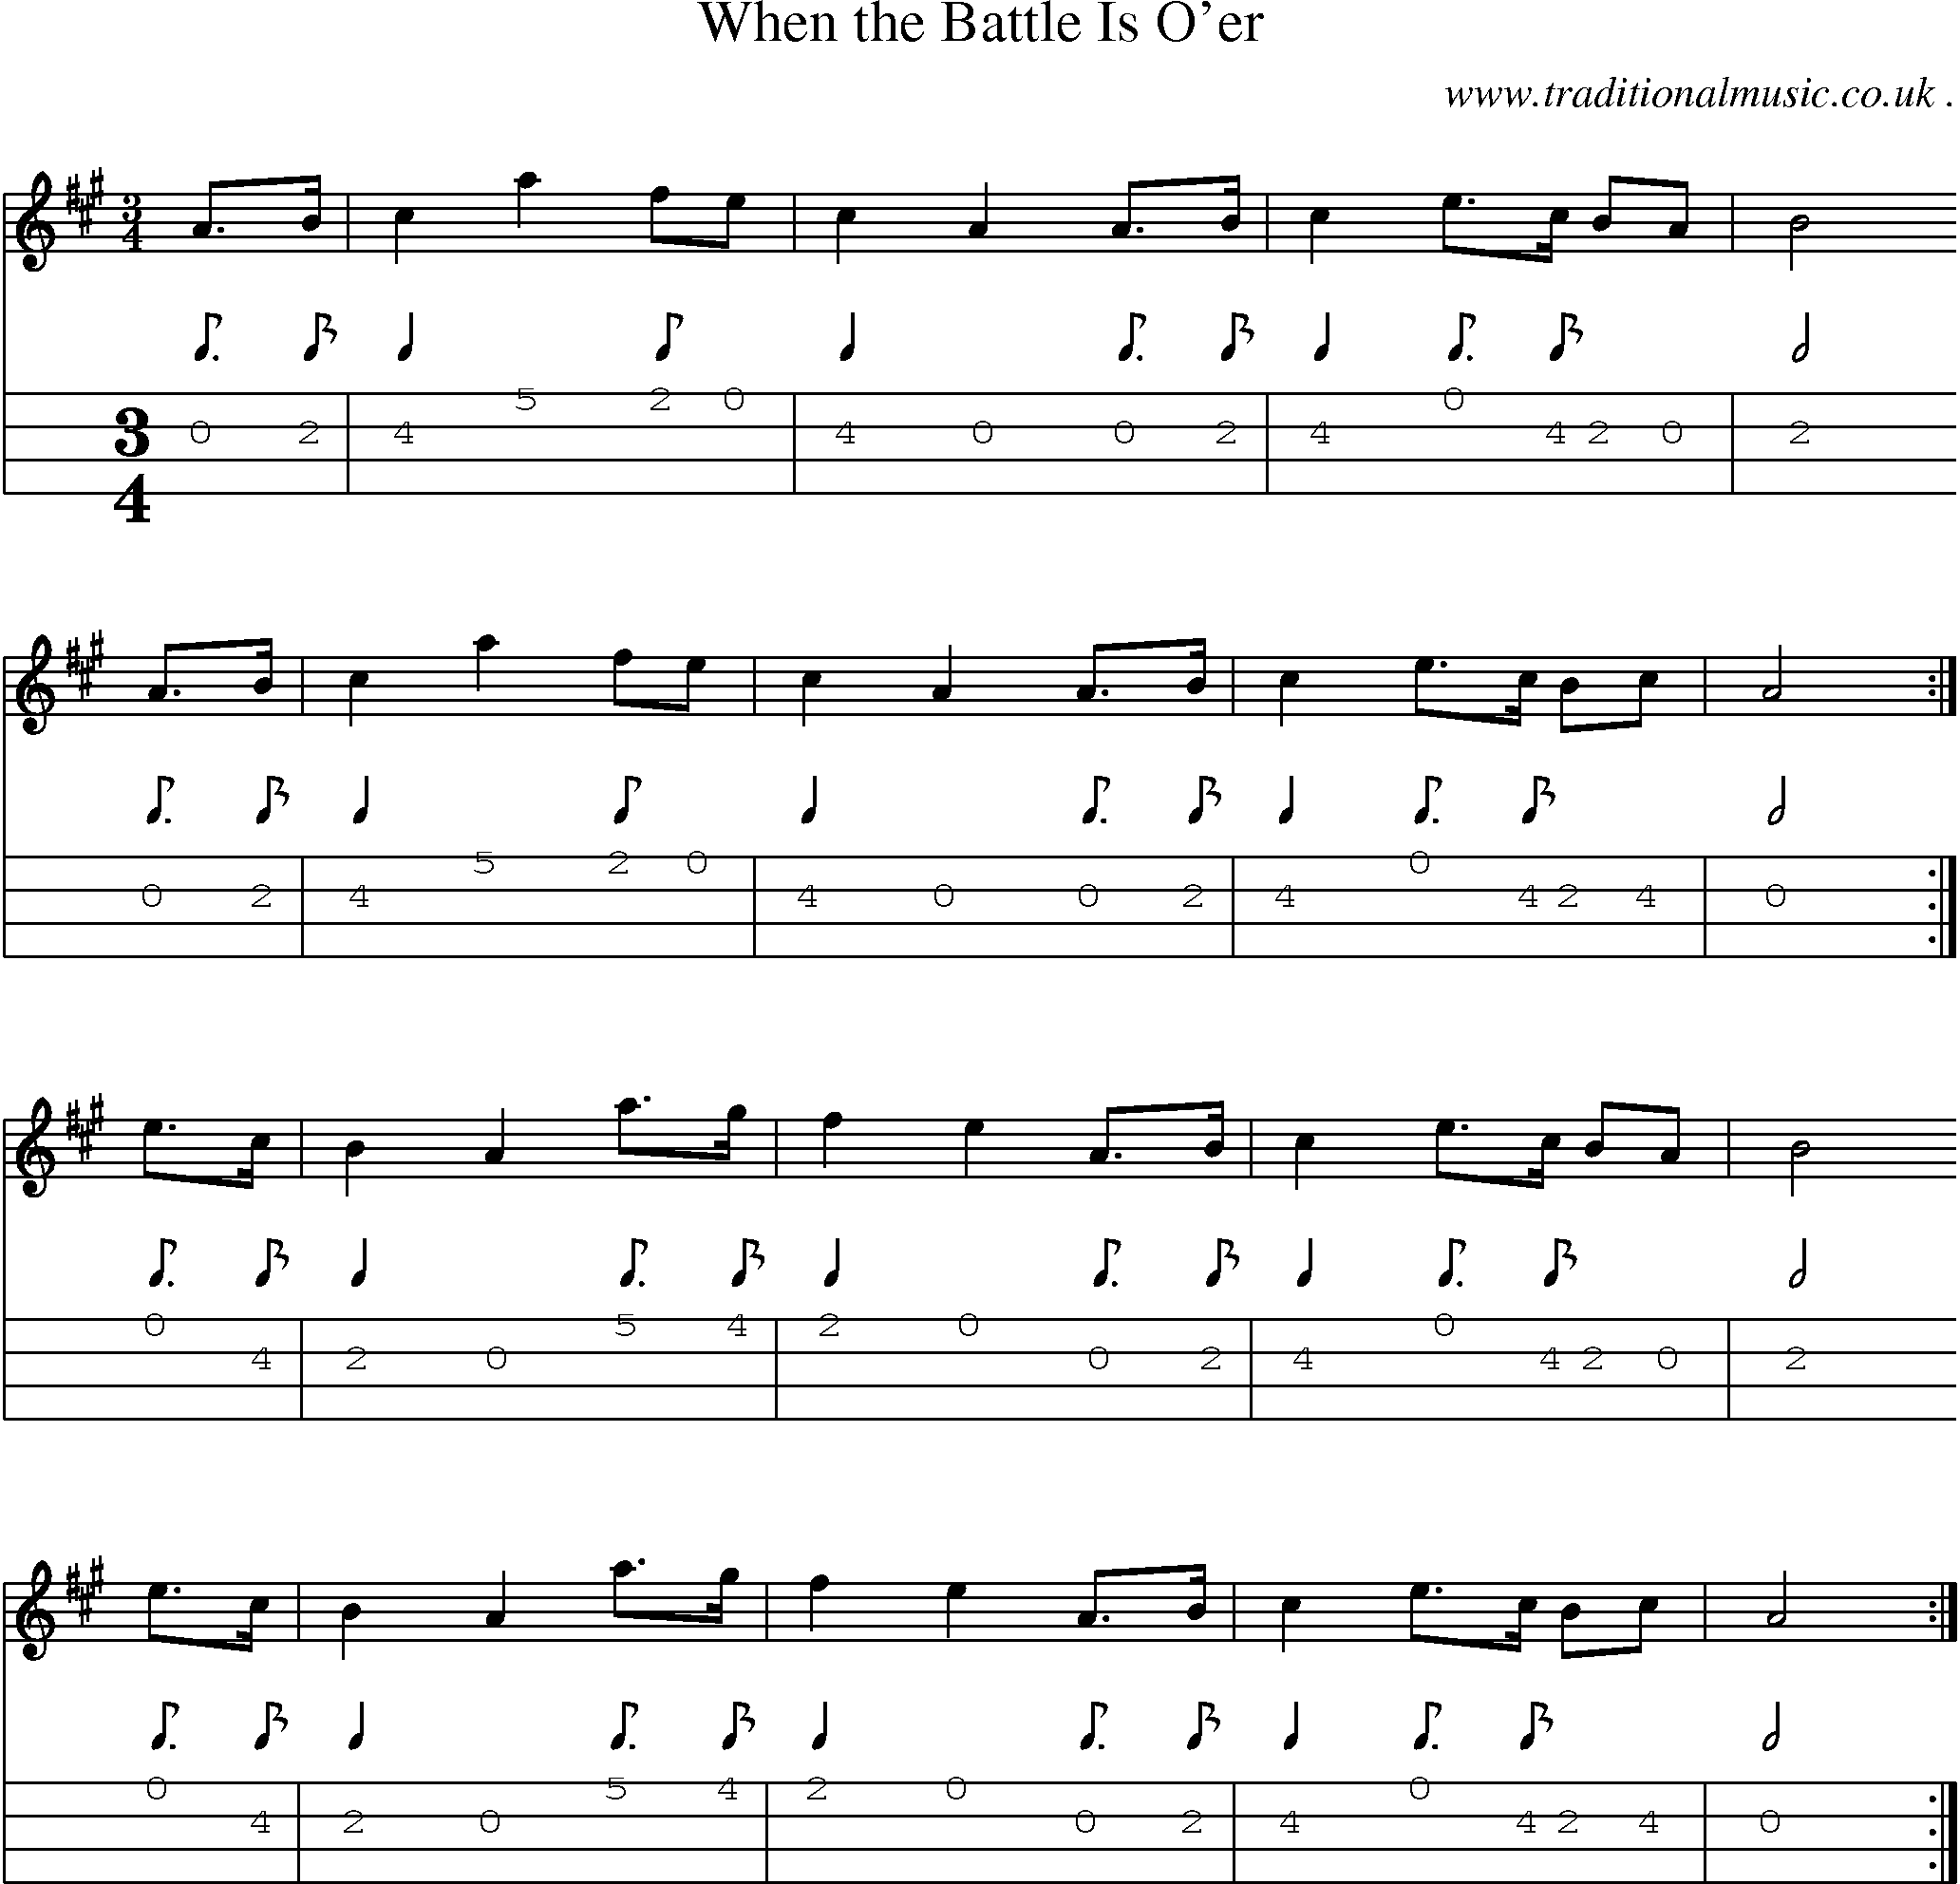 Sheet-music  score, Chords and Mandolin Tabs for When The Battle Is Oer